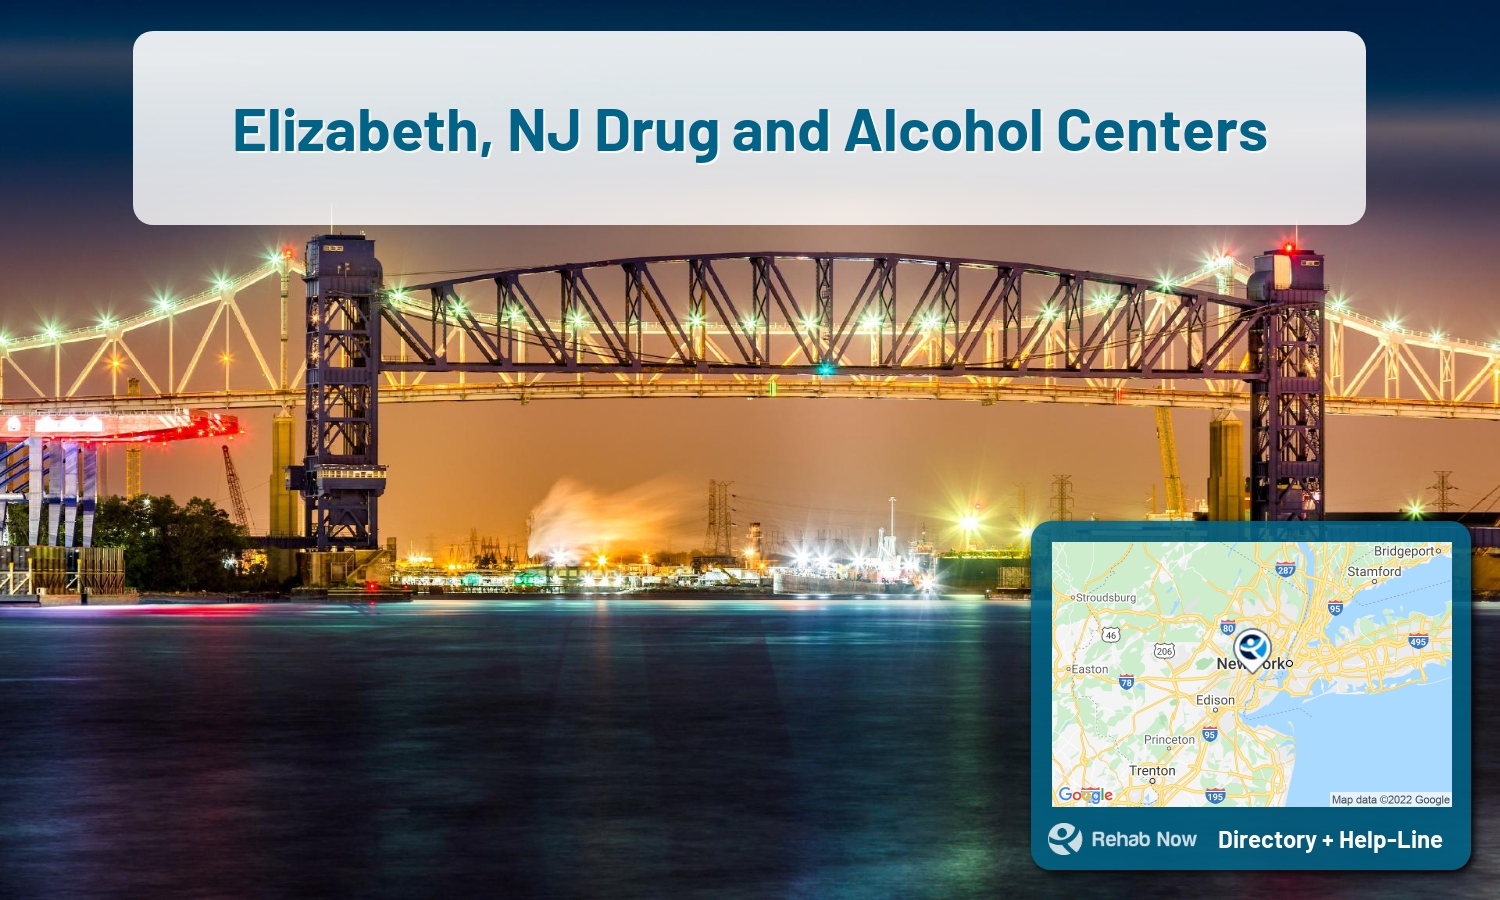 Elizabeth, NJ Treatment Centers. Find drug rehab in Elizabeth, New Jersey, or detox and treatment programs. Get the right help now!